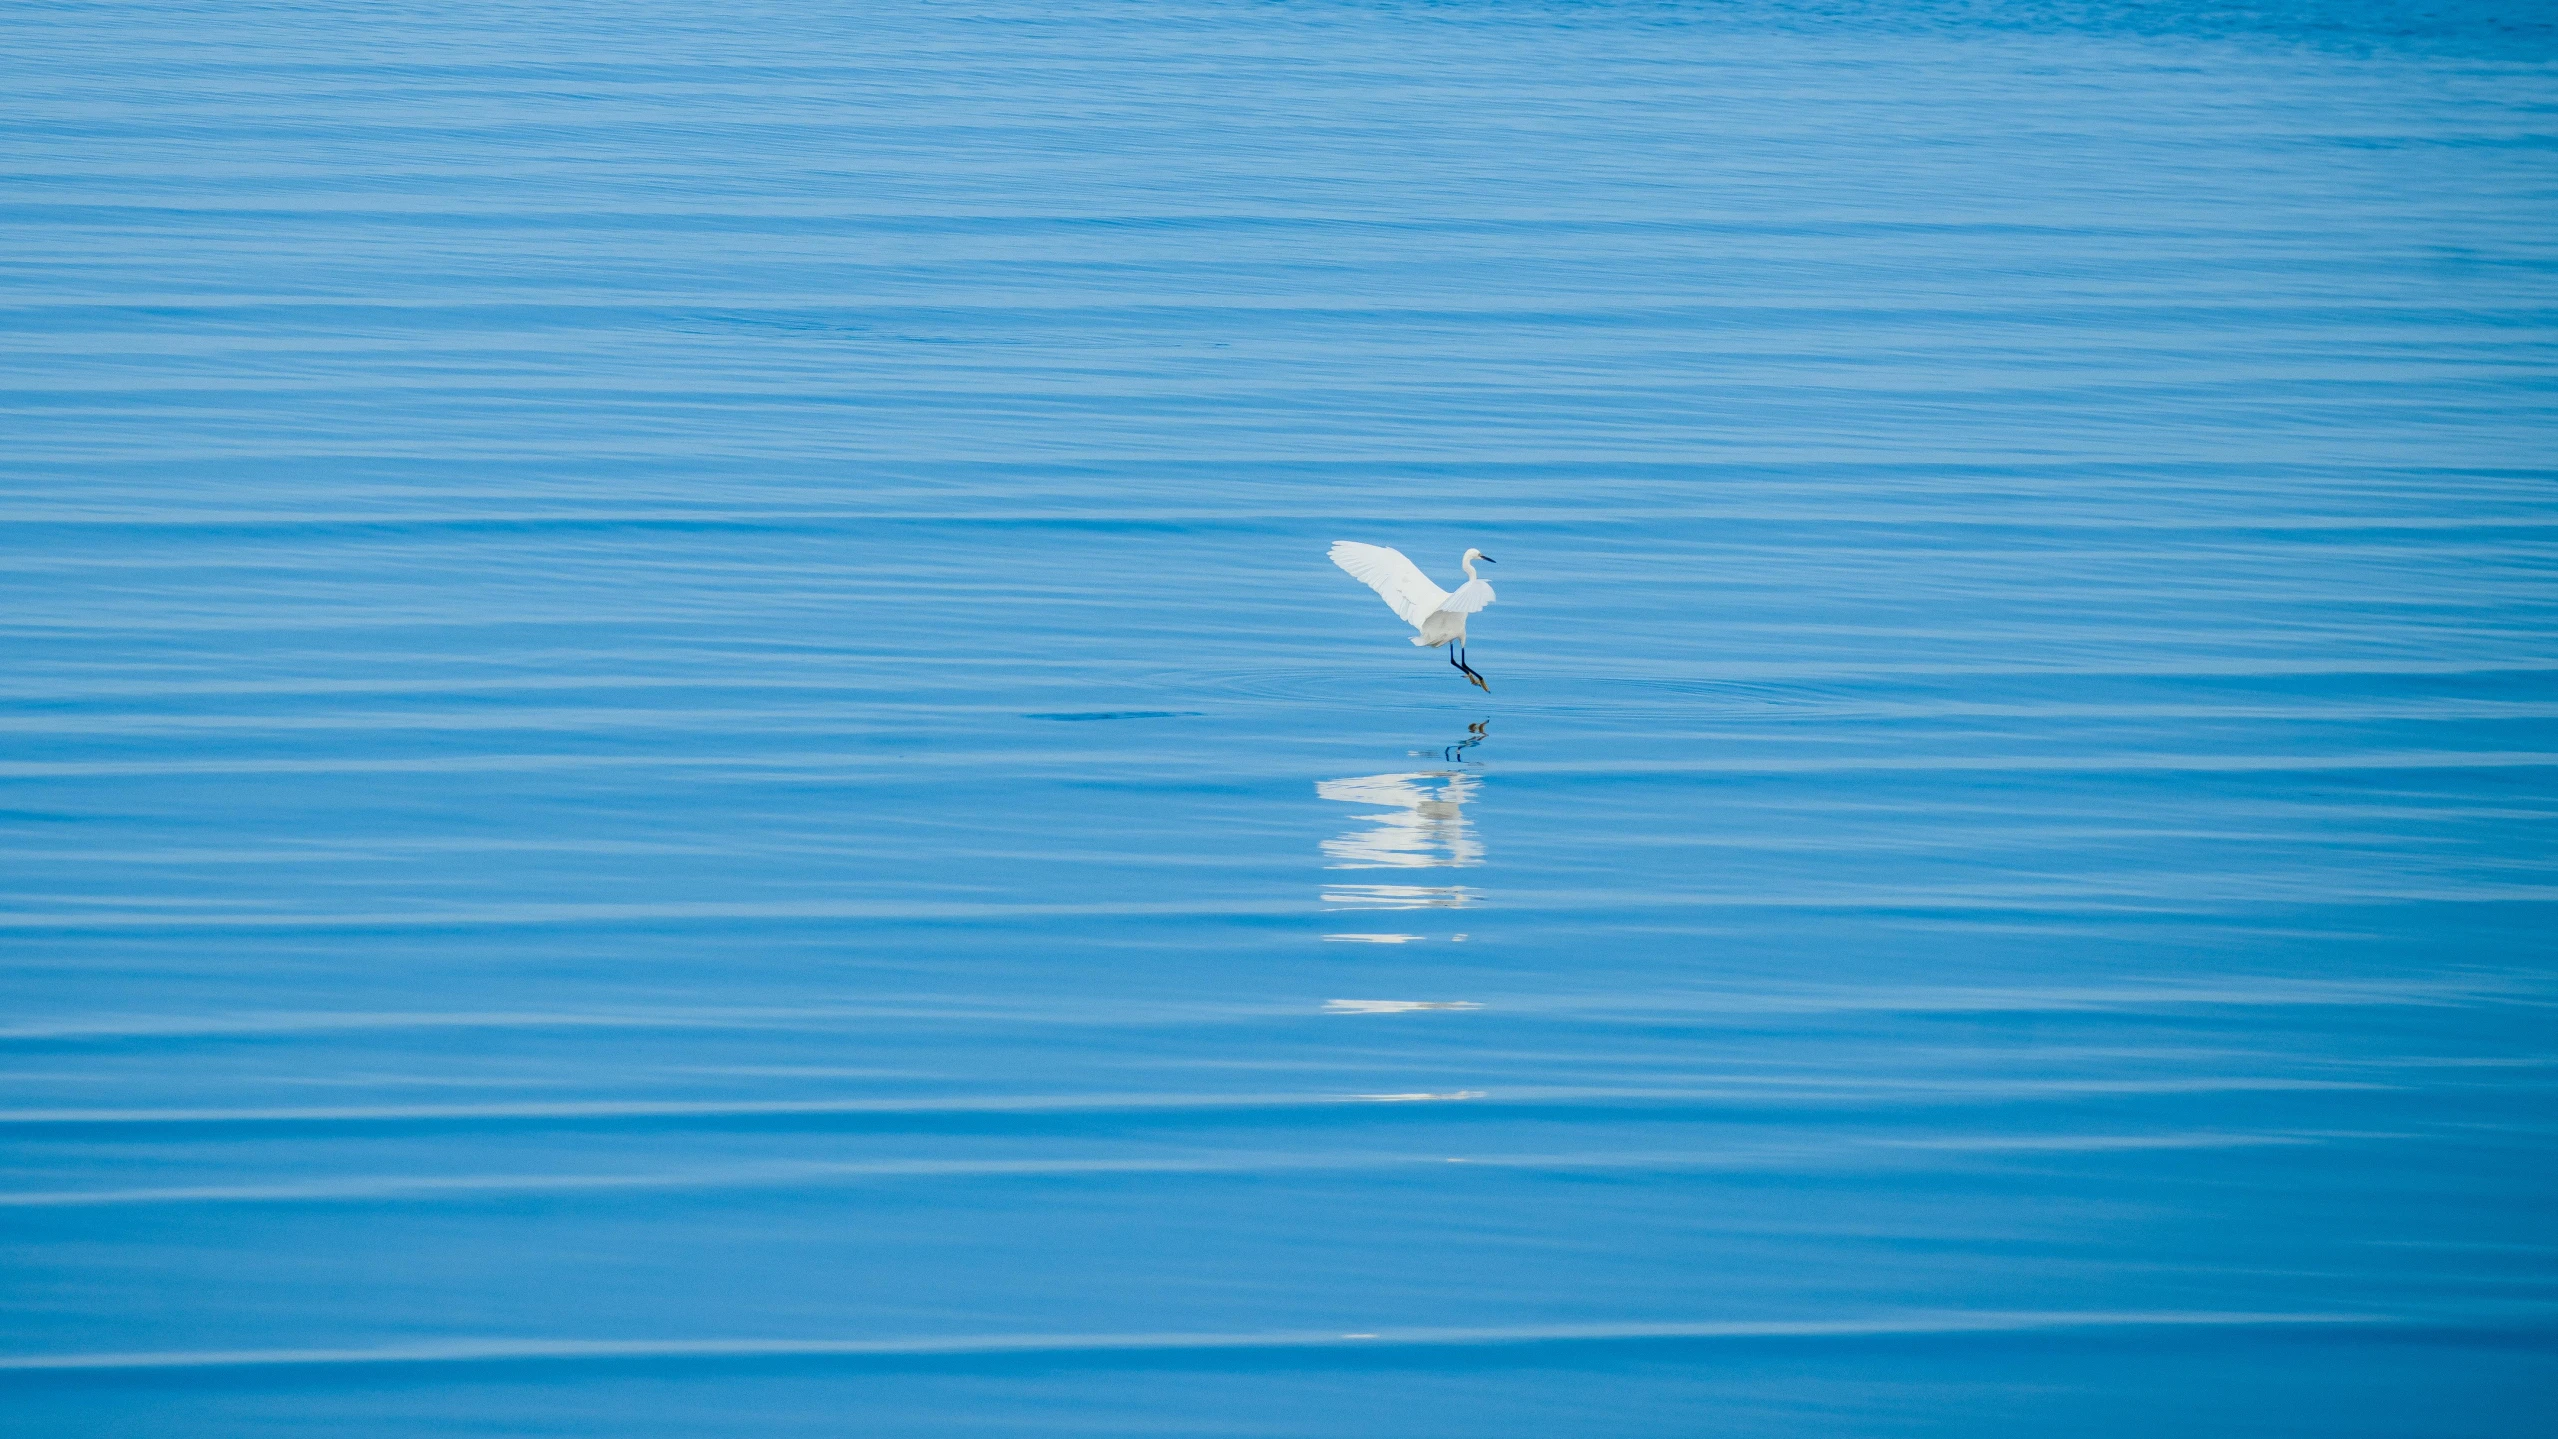 a white bird flying over a body of water, by Paul Bird, pexels contest winner, minimalism, blue reflections, fishing, 15081959 21121991 01012000 4k, offset and takeoff